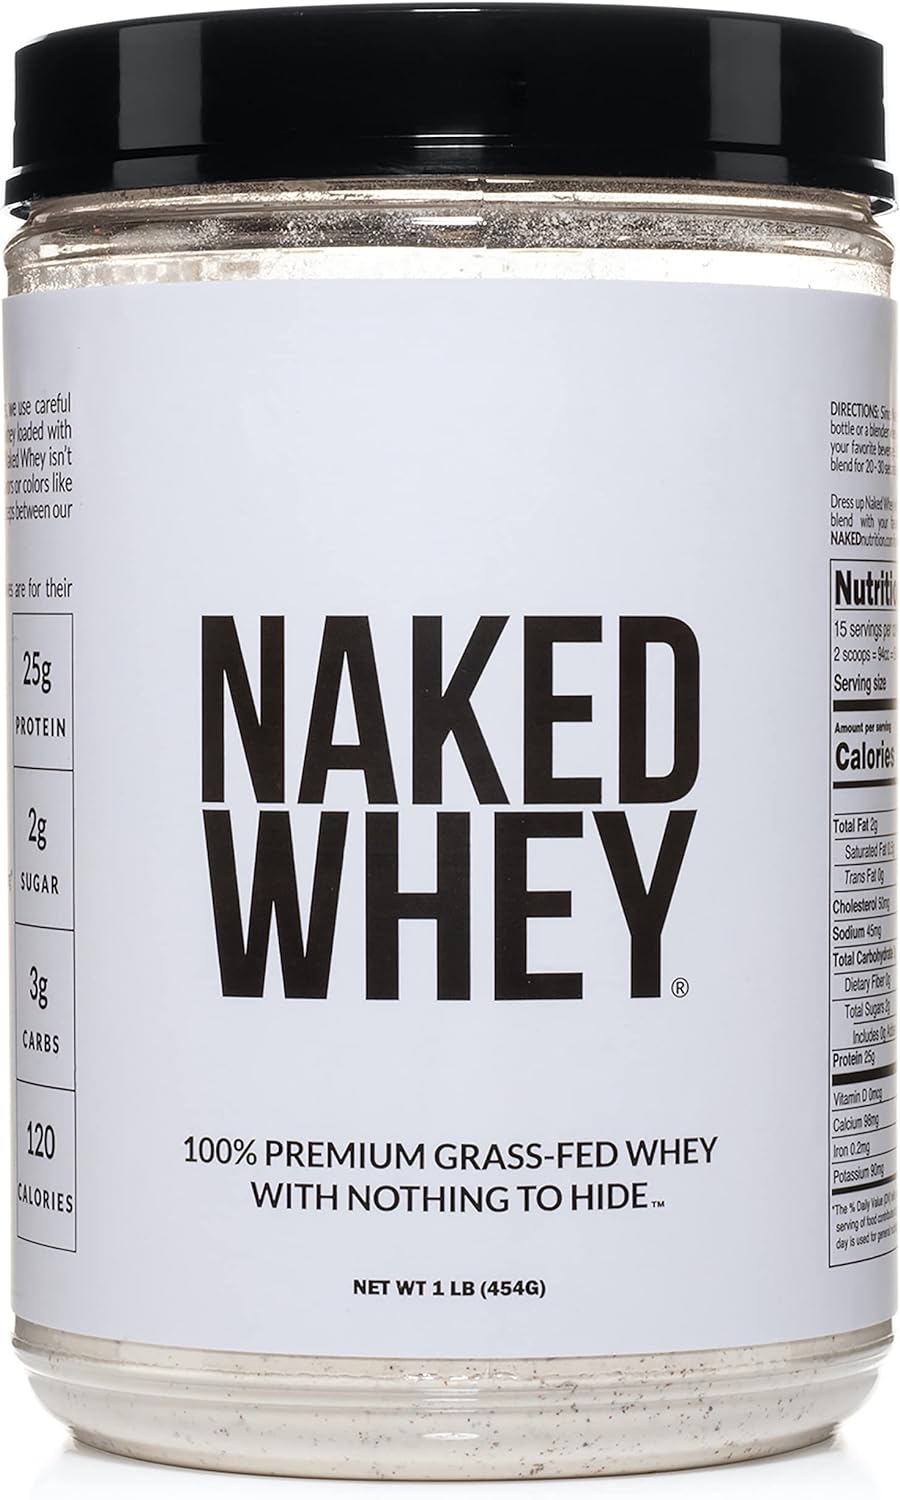 Naked Nutrition Naked Whey 1Lb - Only 1 Ingredient, Grass Fed Whey Protein Powder, Undenatured, No Gmos, No Soy, Gluten Free, Stimulate Growth, Enhance Recovery - 15 Servings